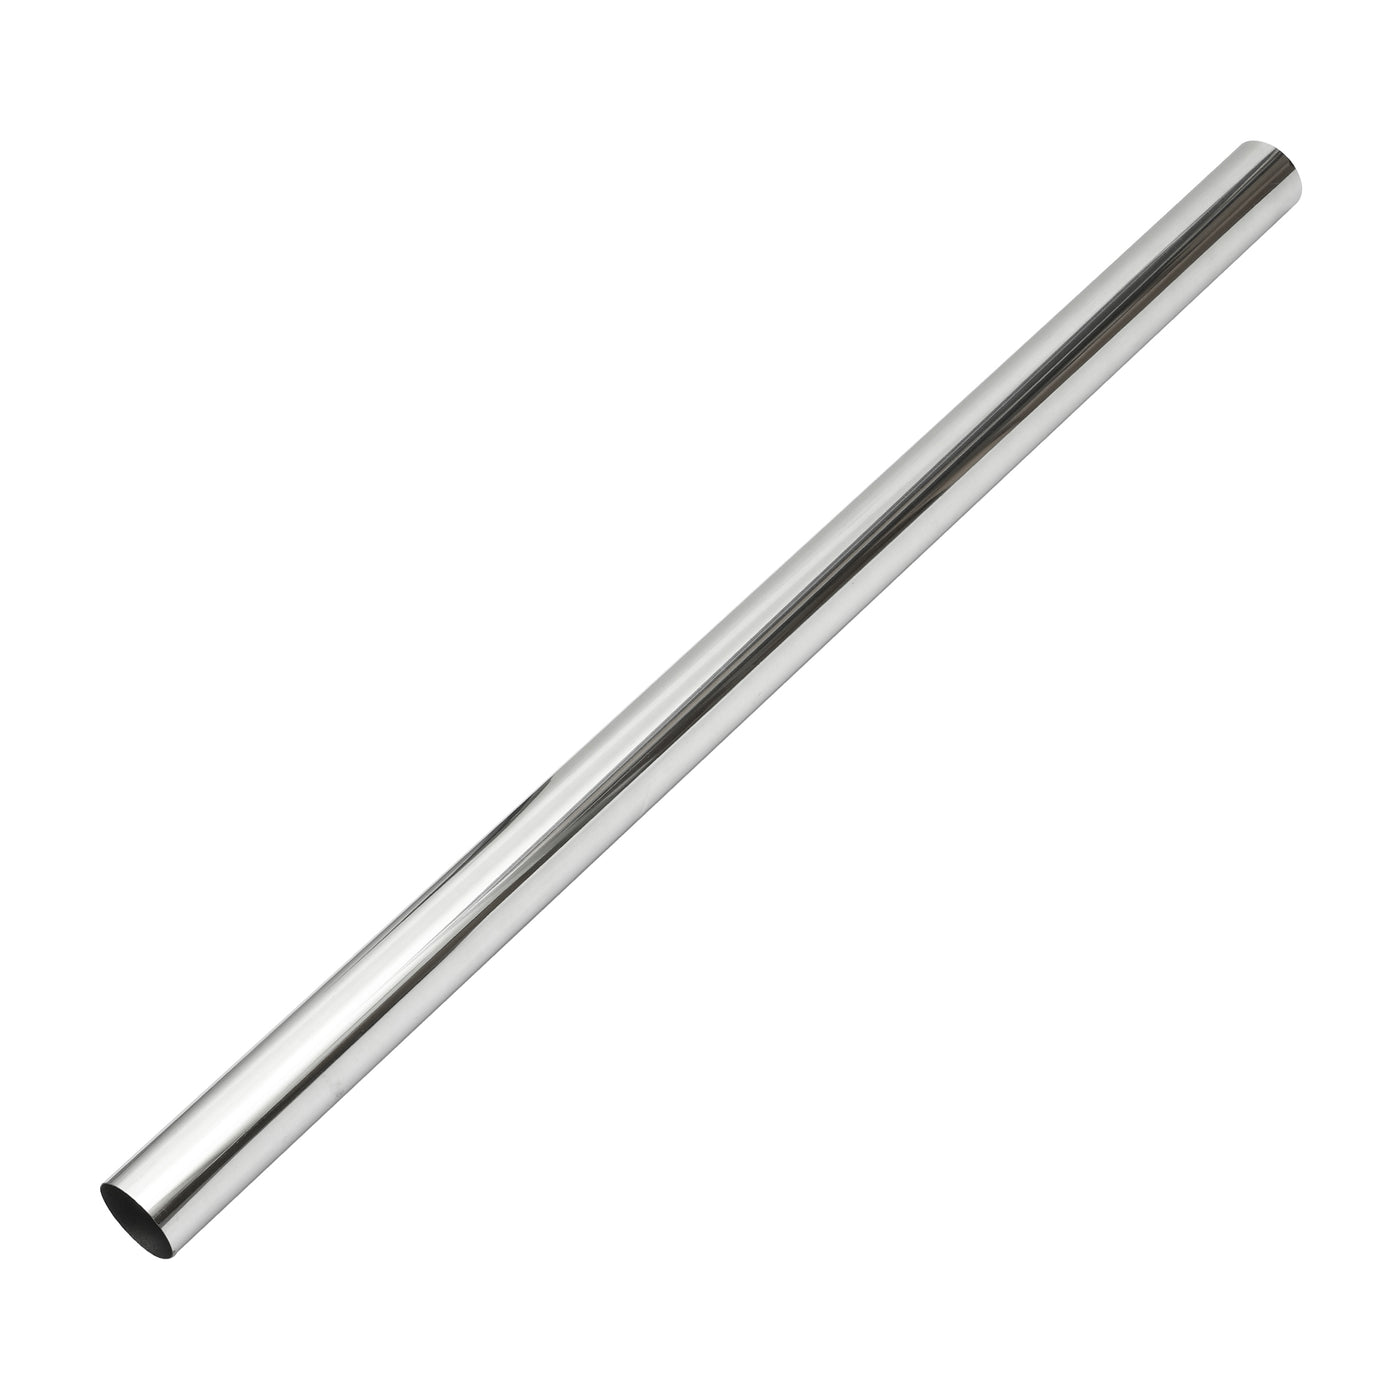 A ABSOPRO Car Mandrel Exhaust Pipe Tube Durable 48" Length 2.5'' OD Straight Exhaust Tube DIY Custom 0 Degree Modified Piping T304 Stainless Steel Silver Tone